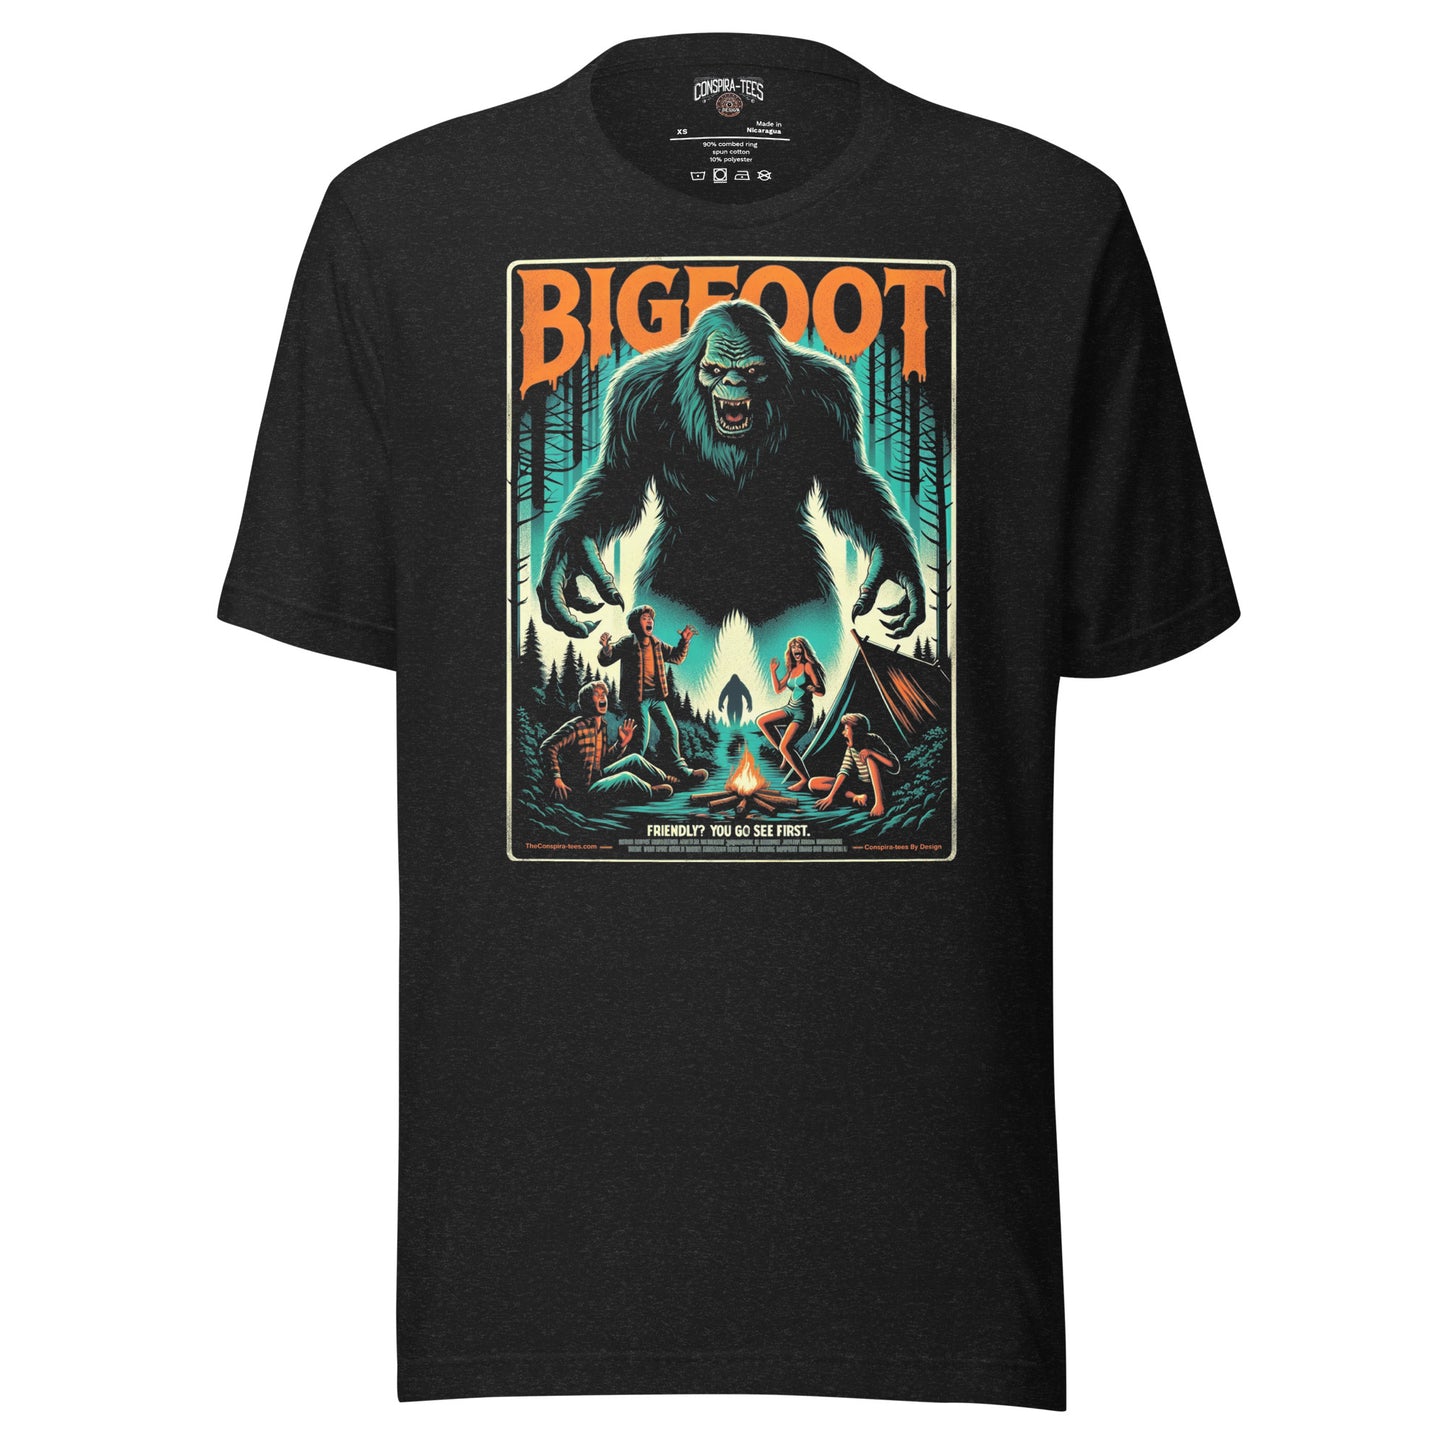 Bigfoot Friendly? You Go See First Unisex t-shirt